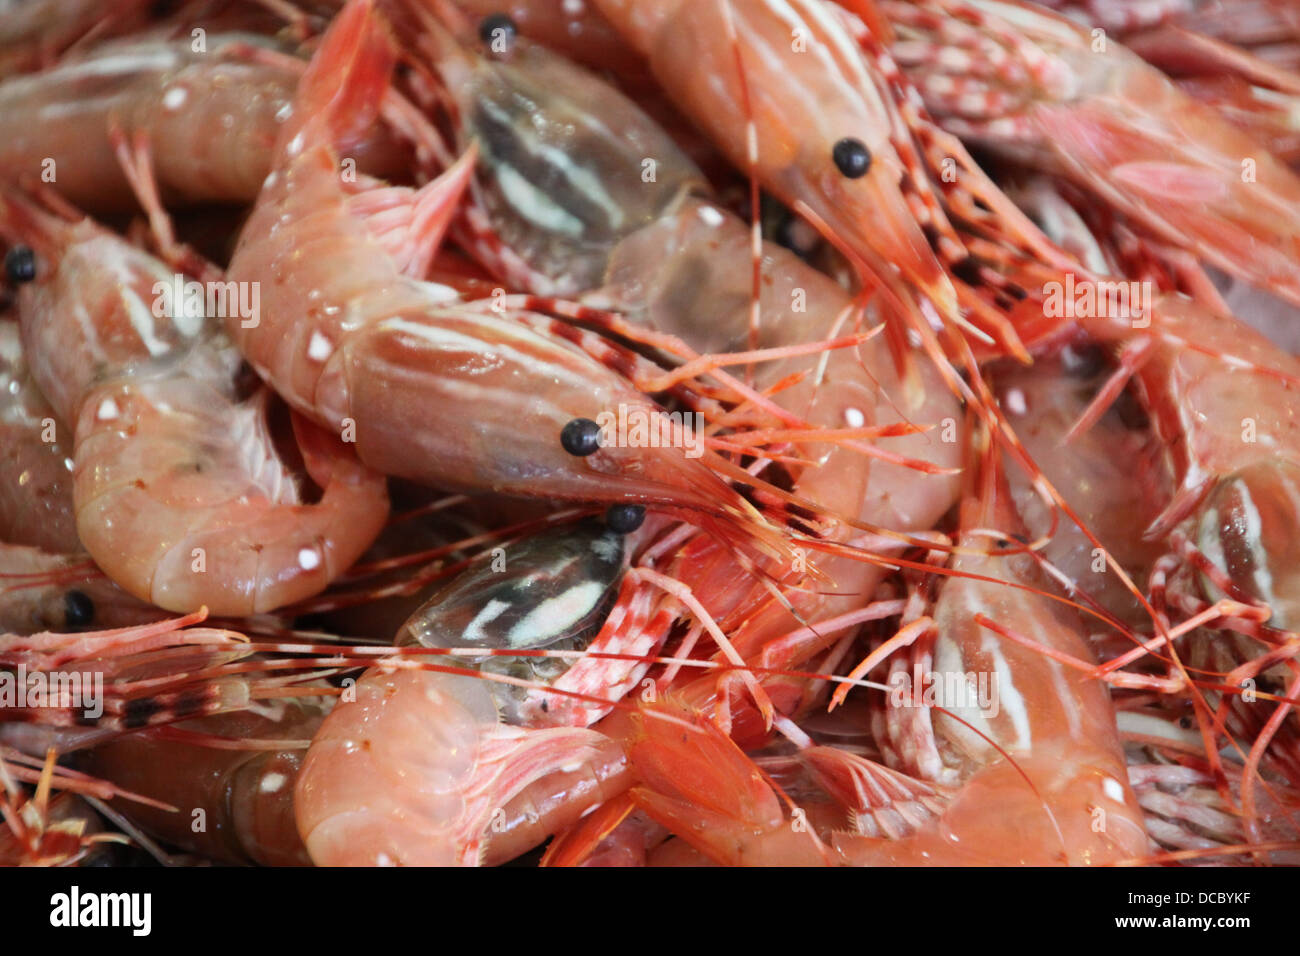 Shrimp sold by the pound at fish market. Stock Photo